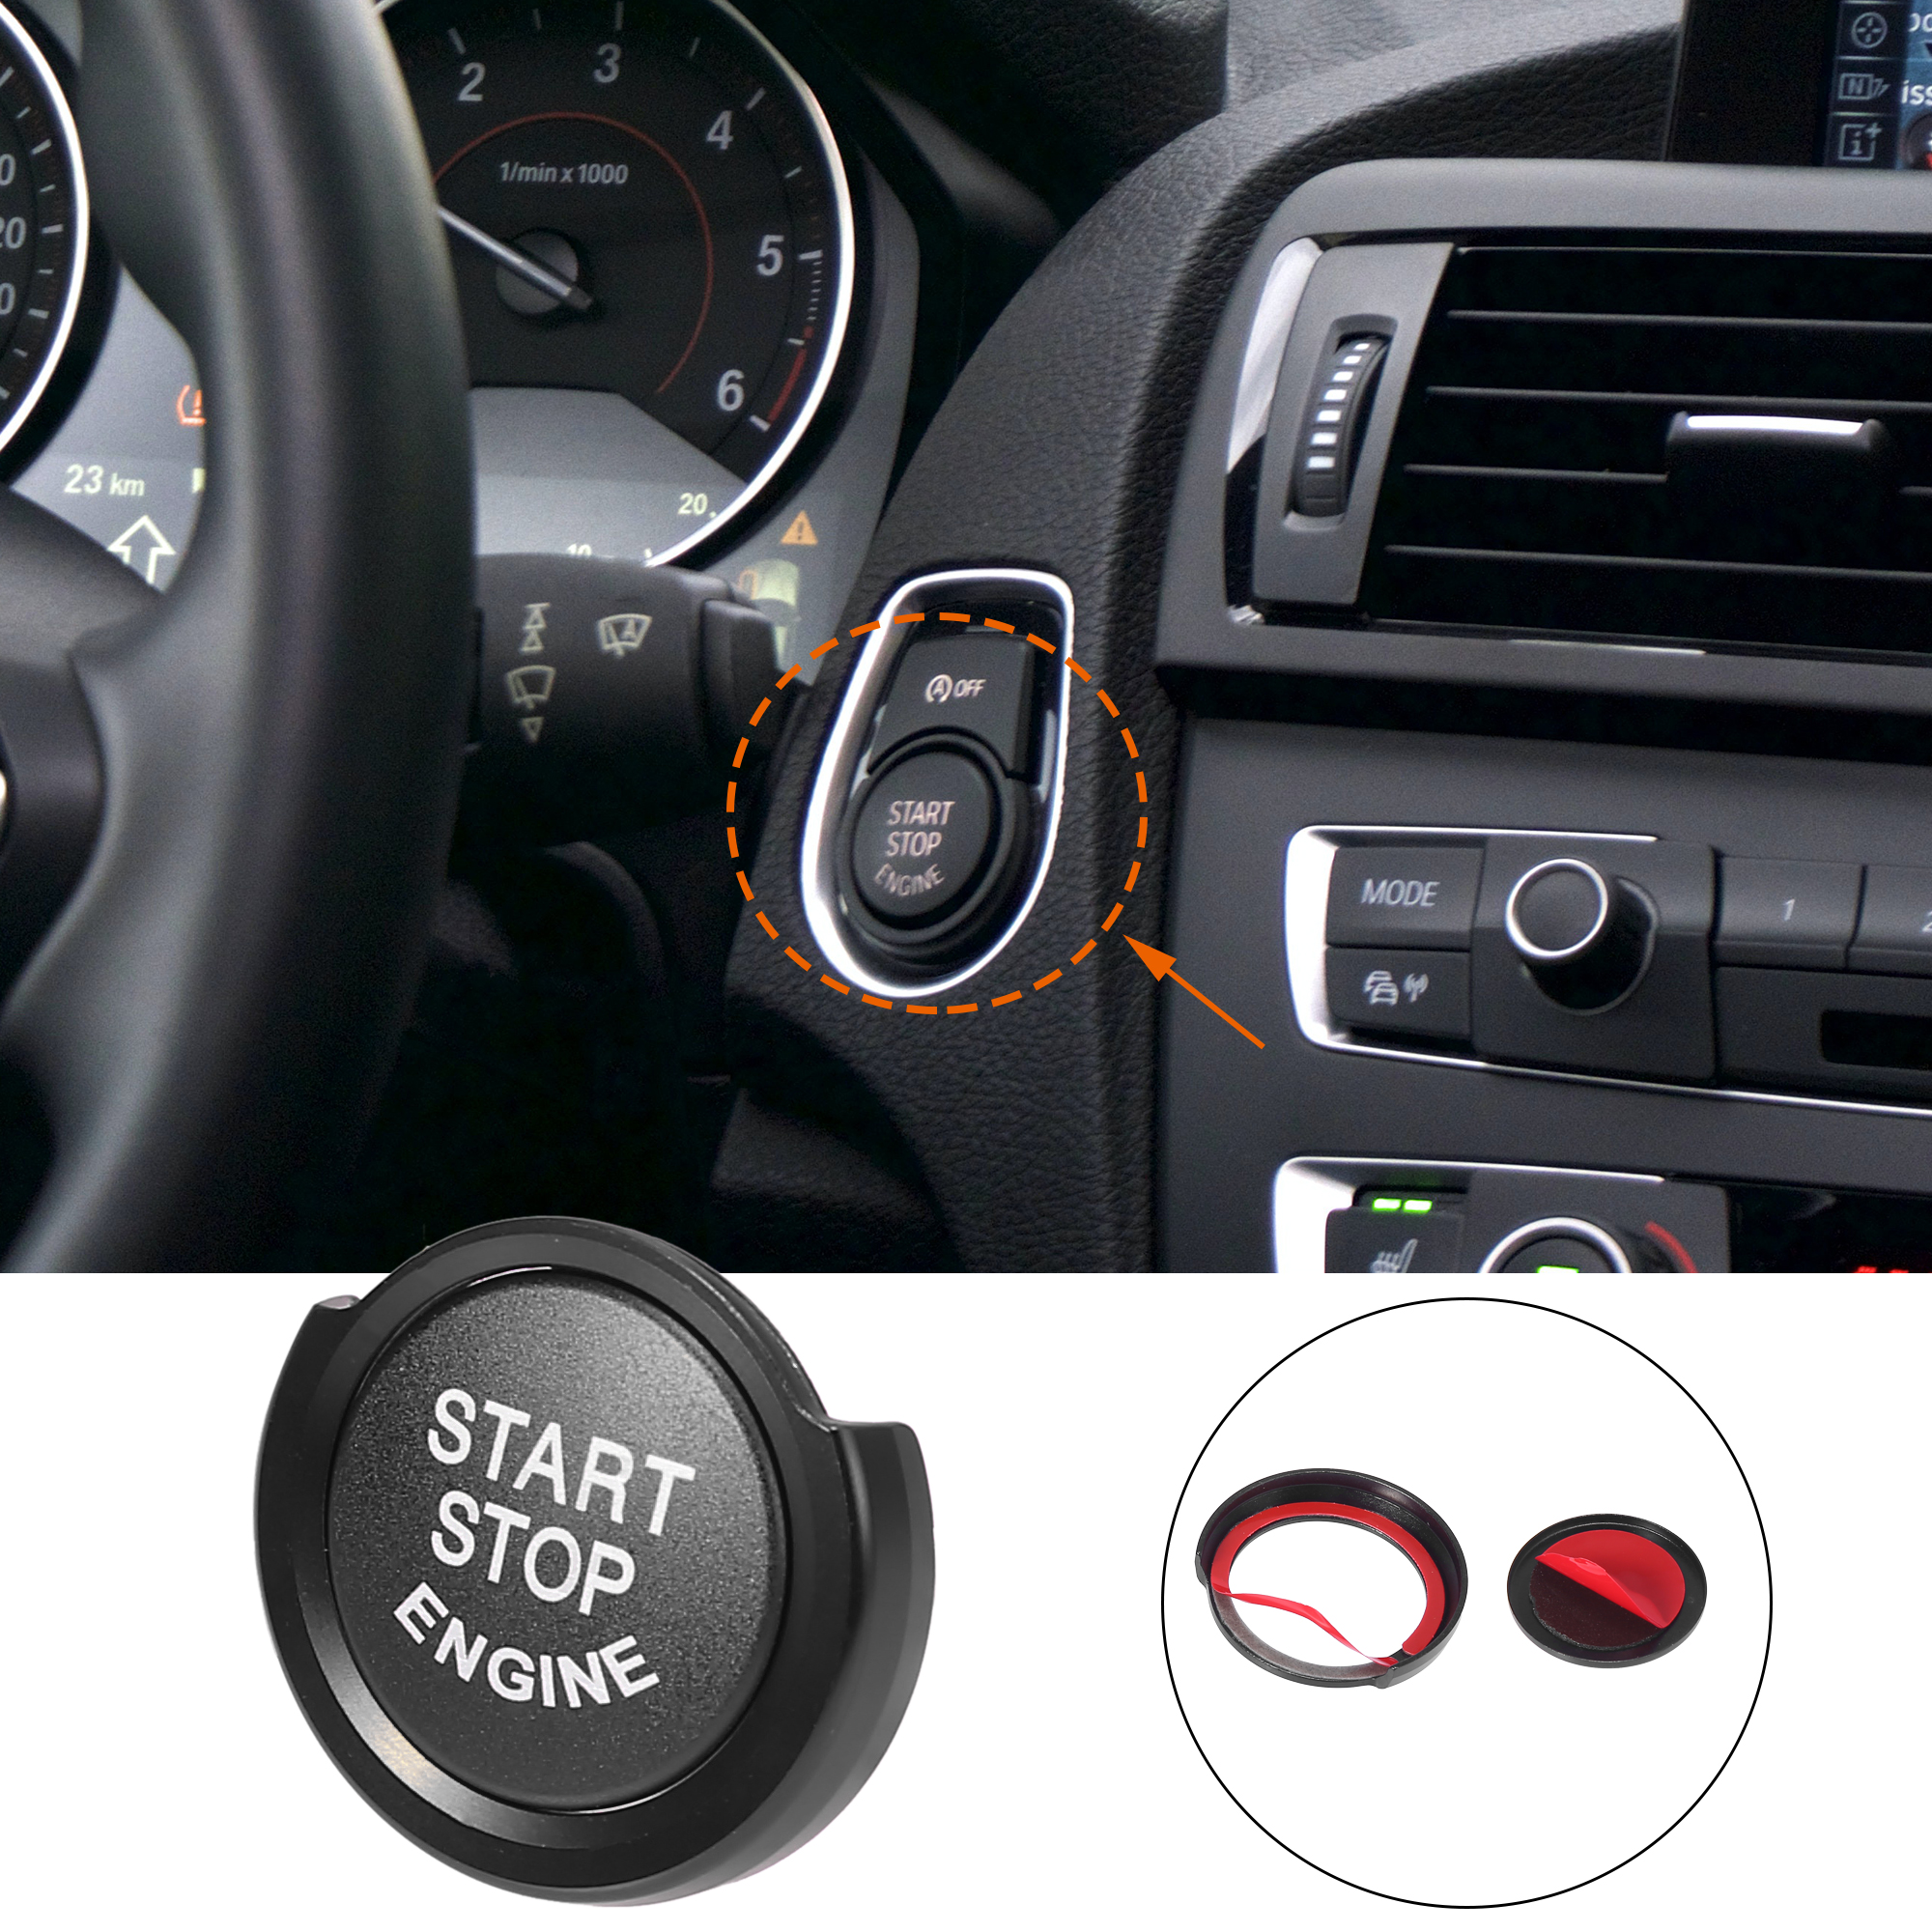 Unique Bargains Car Start Stop Button Cap with Ring Kit for BMW 1 2 3 4 Series X1 X2 Black